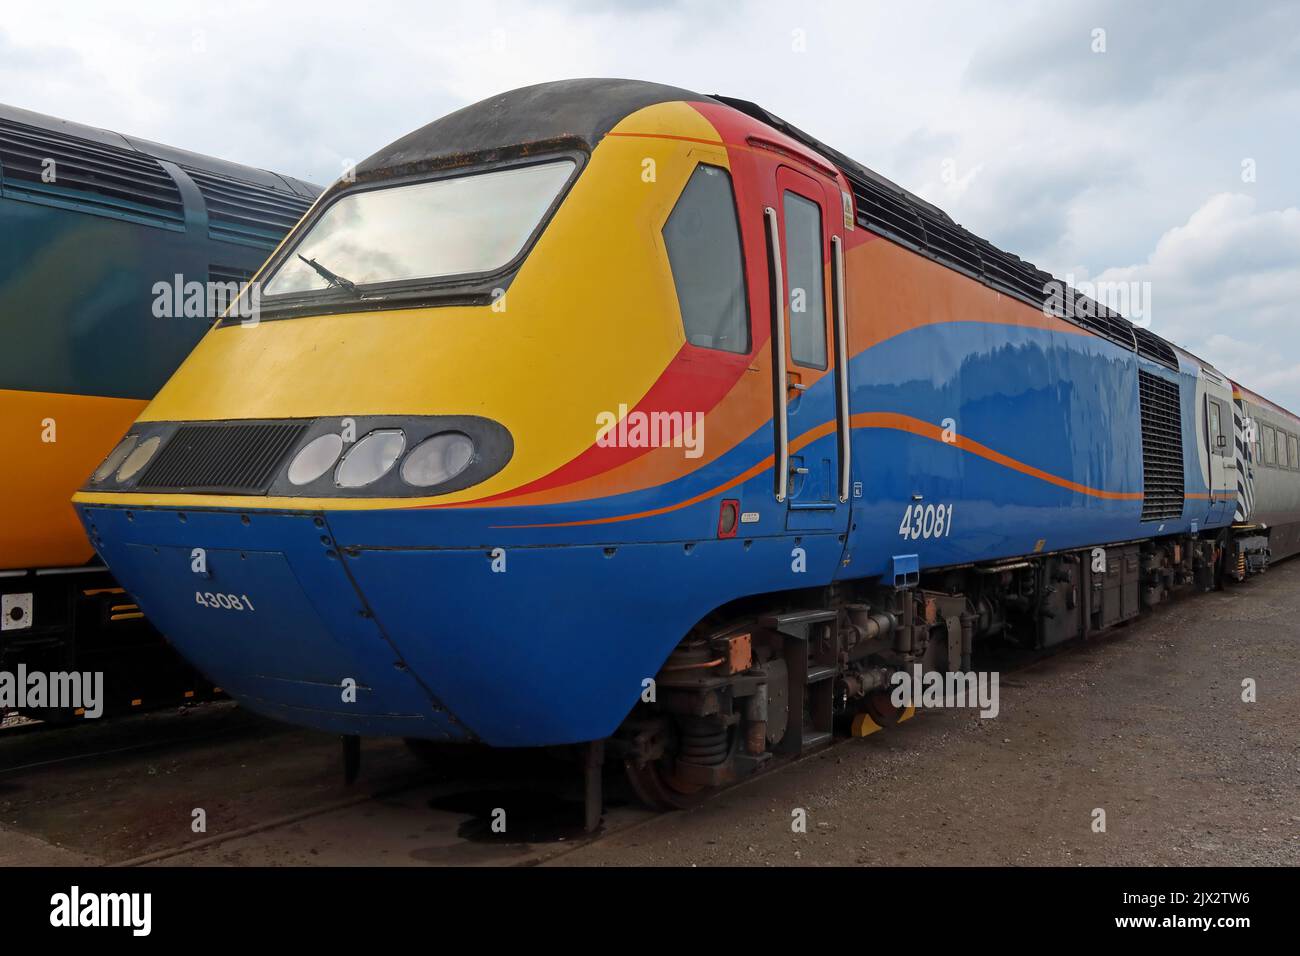 HST Paxman Diesel locomotive power car, VP185 43081, 8,000th engine preserved at Crewe Heritage Centre, Cheshire, England, UK, CW1 2DB Stock Photo